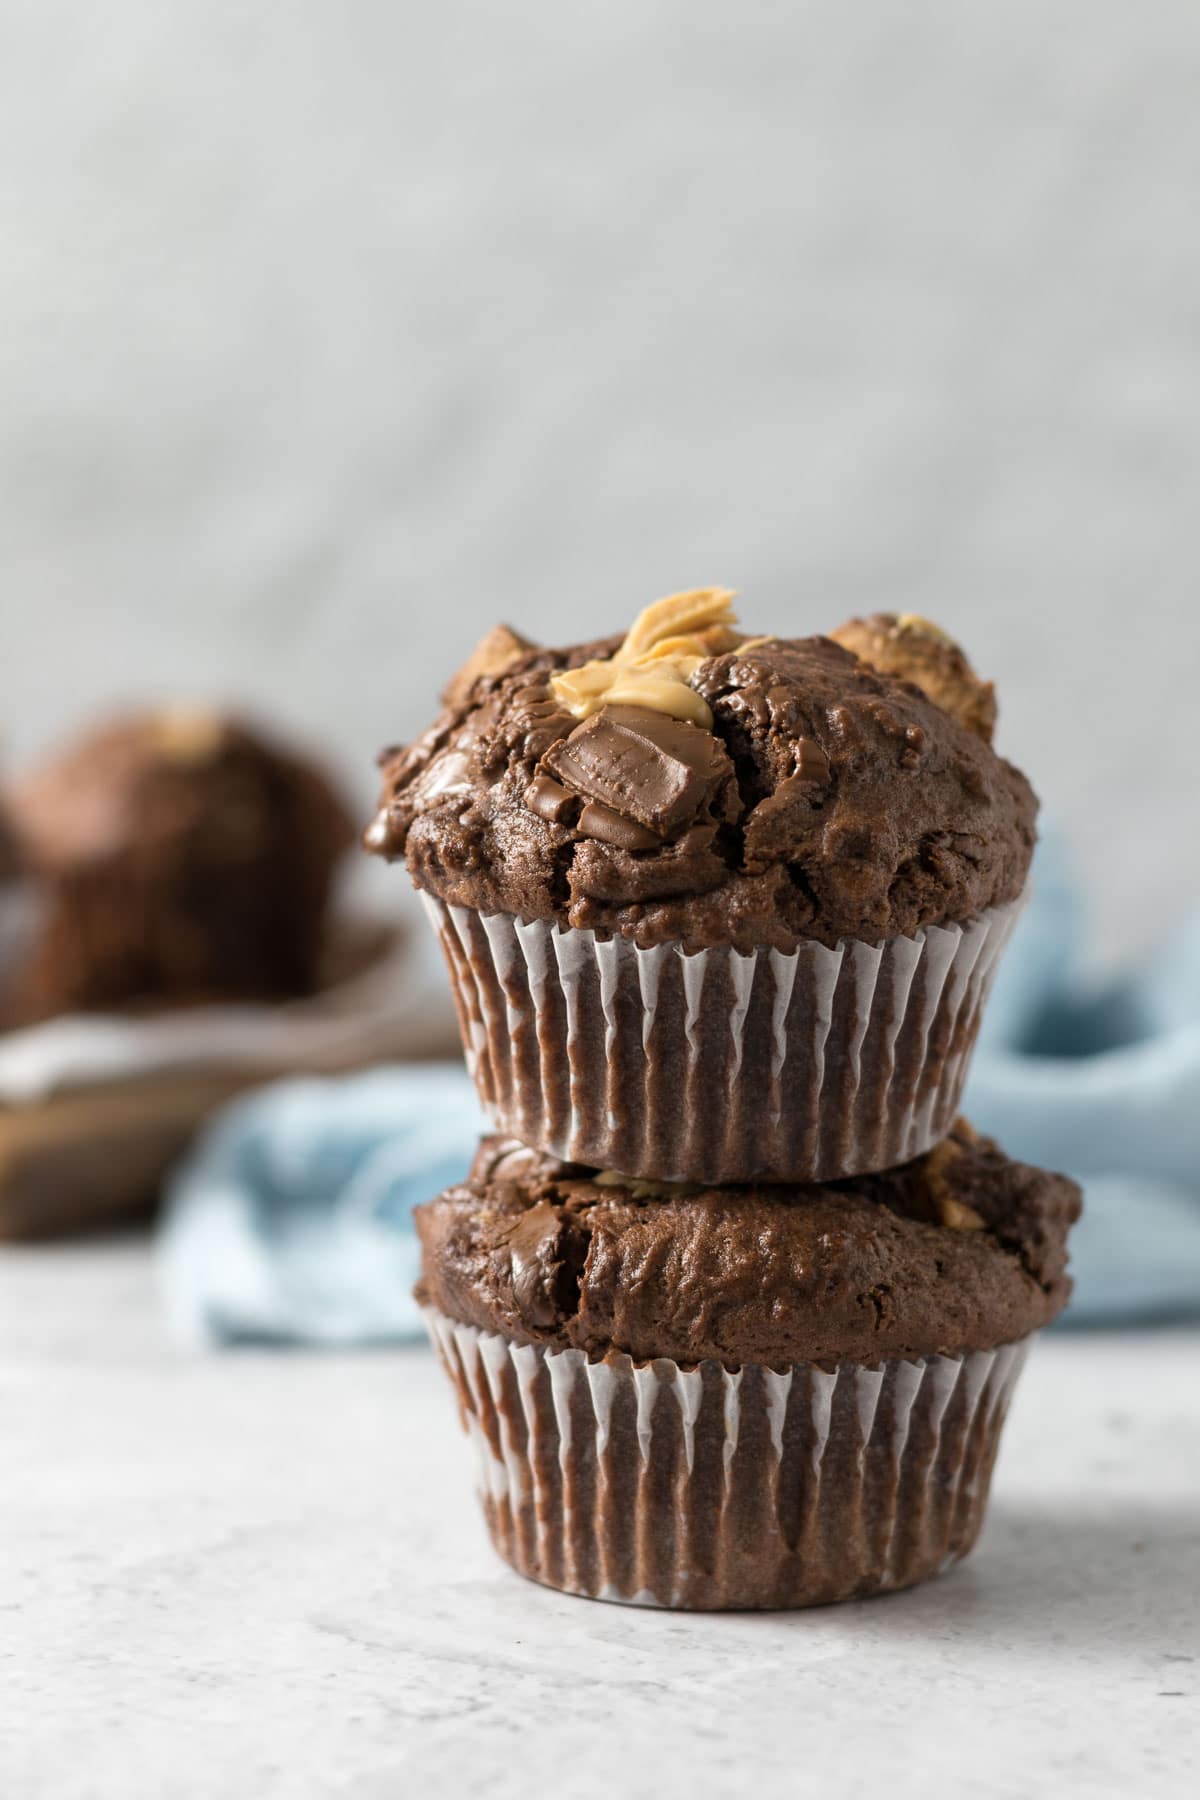 Two chocolate muffins stacked on each other.